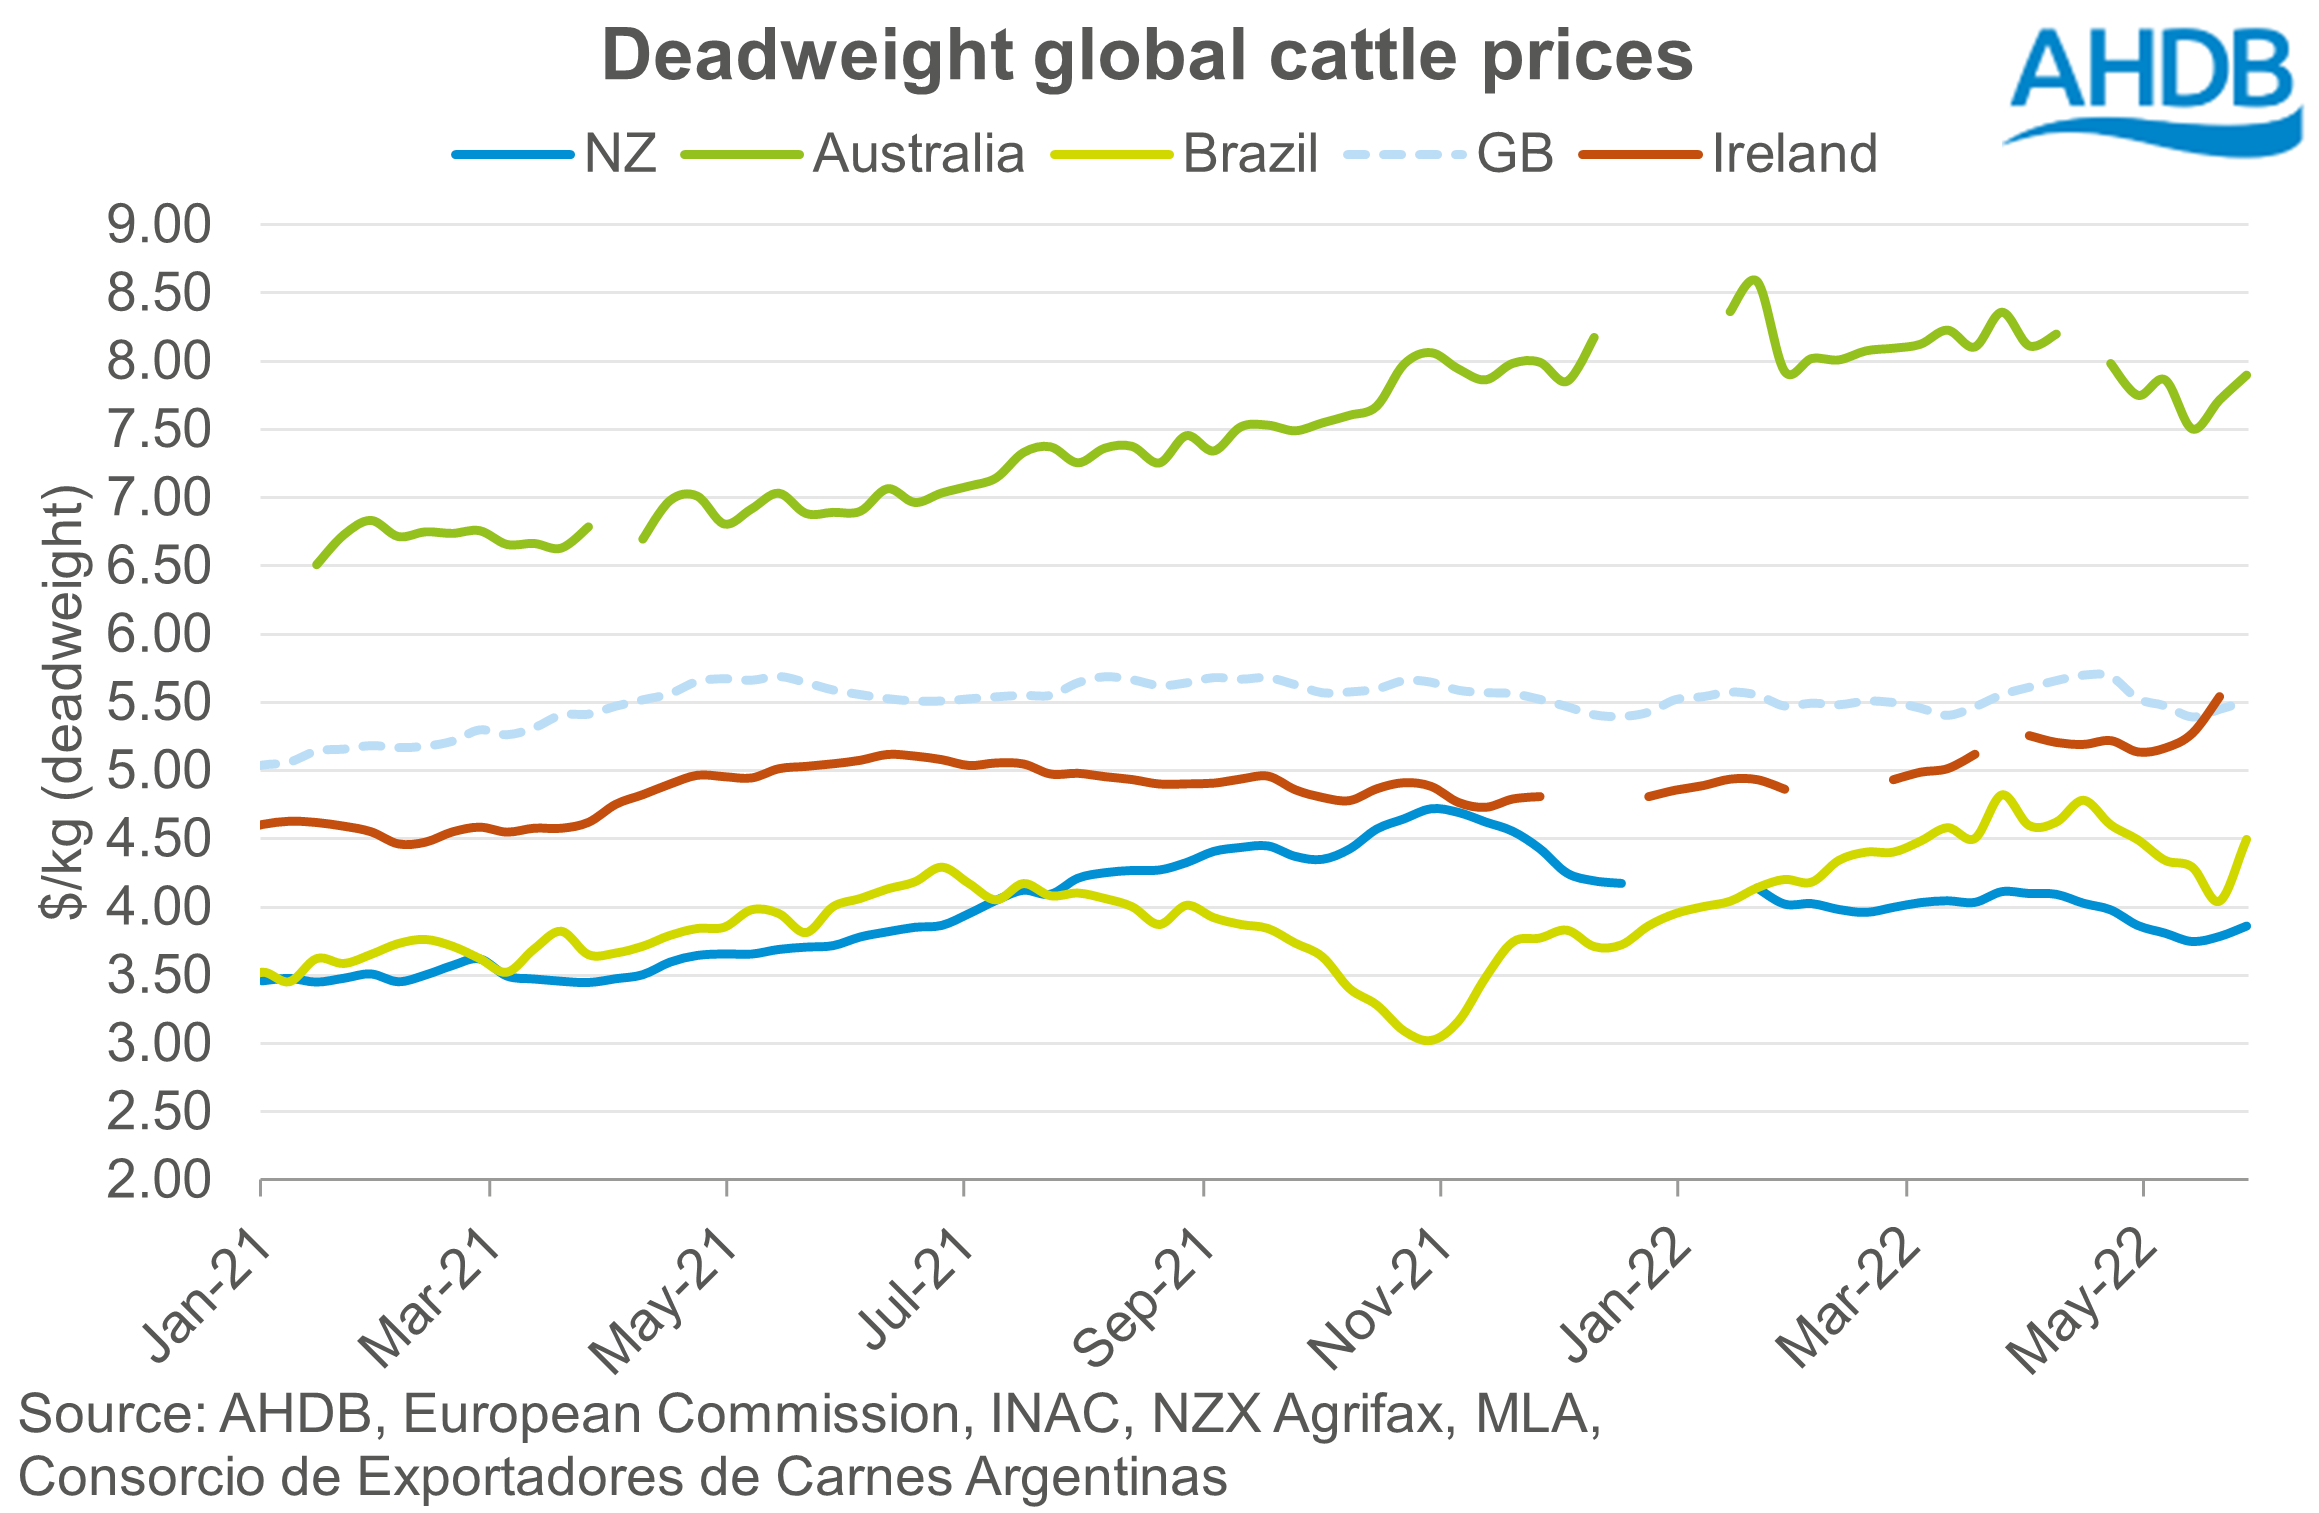 Graph showing weekly global deadweight cattle prices in USD up to June 2022